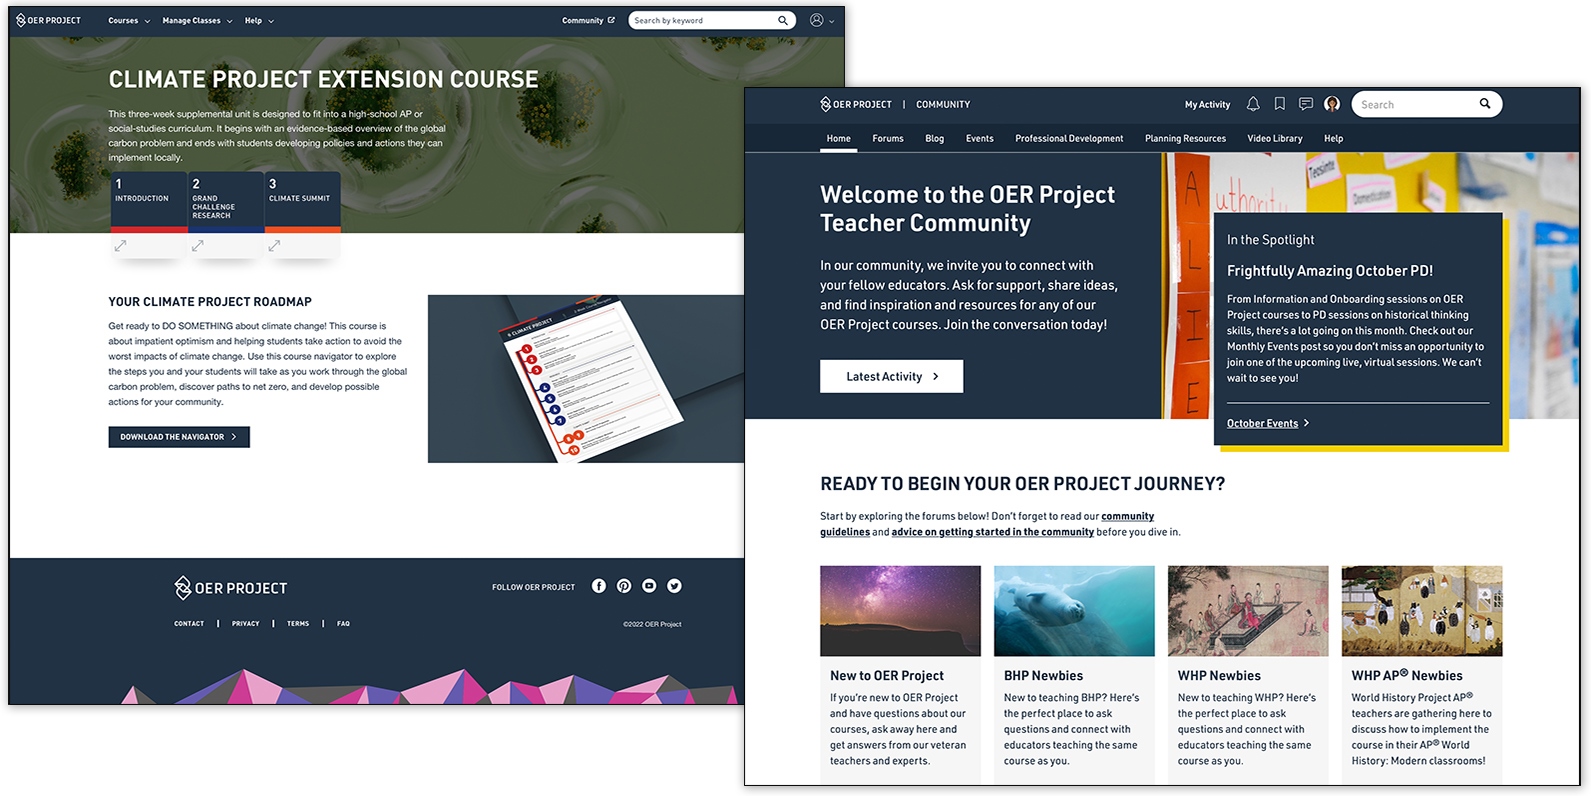 Climate Project Extension course (left) and the OER Project Teacher Community (right)